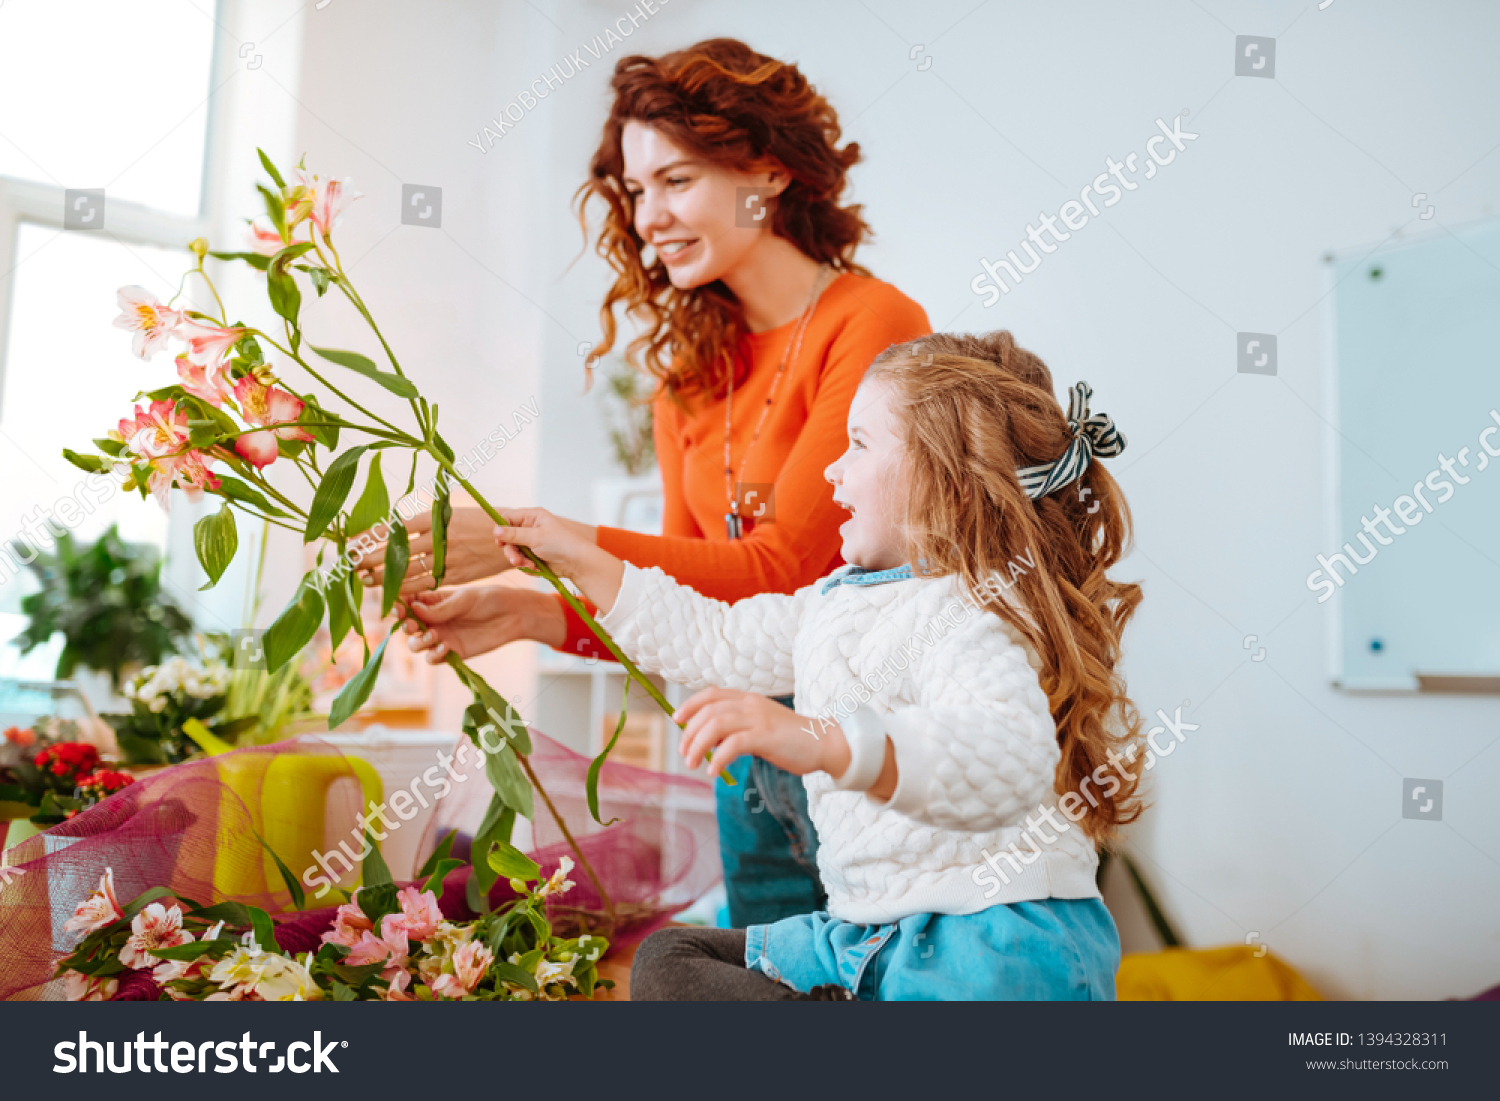 Cheerful daughter. Cheerful daughter with wavy hair having fun while looking at flowers with mom #1394328311